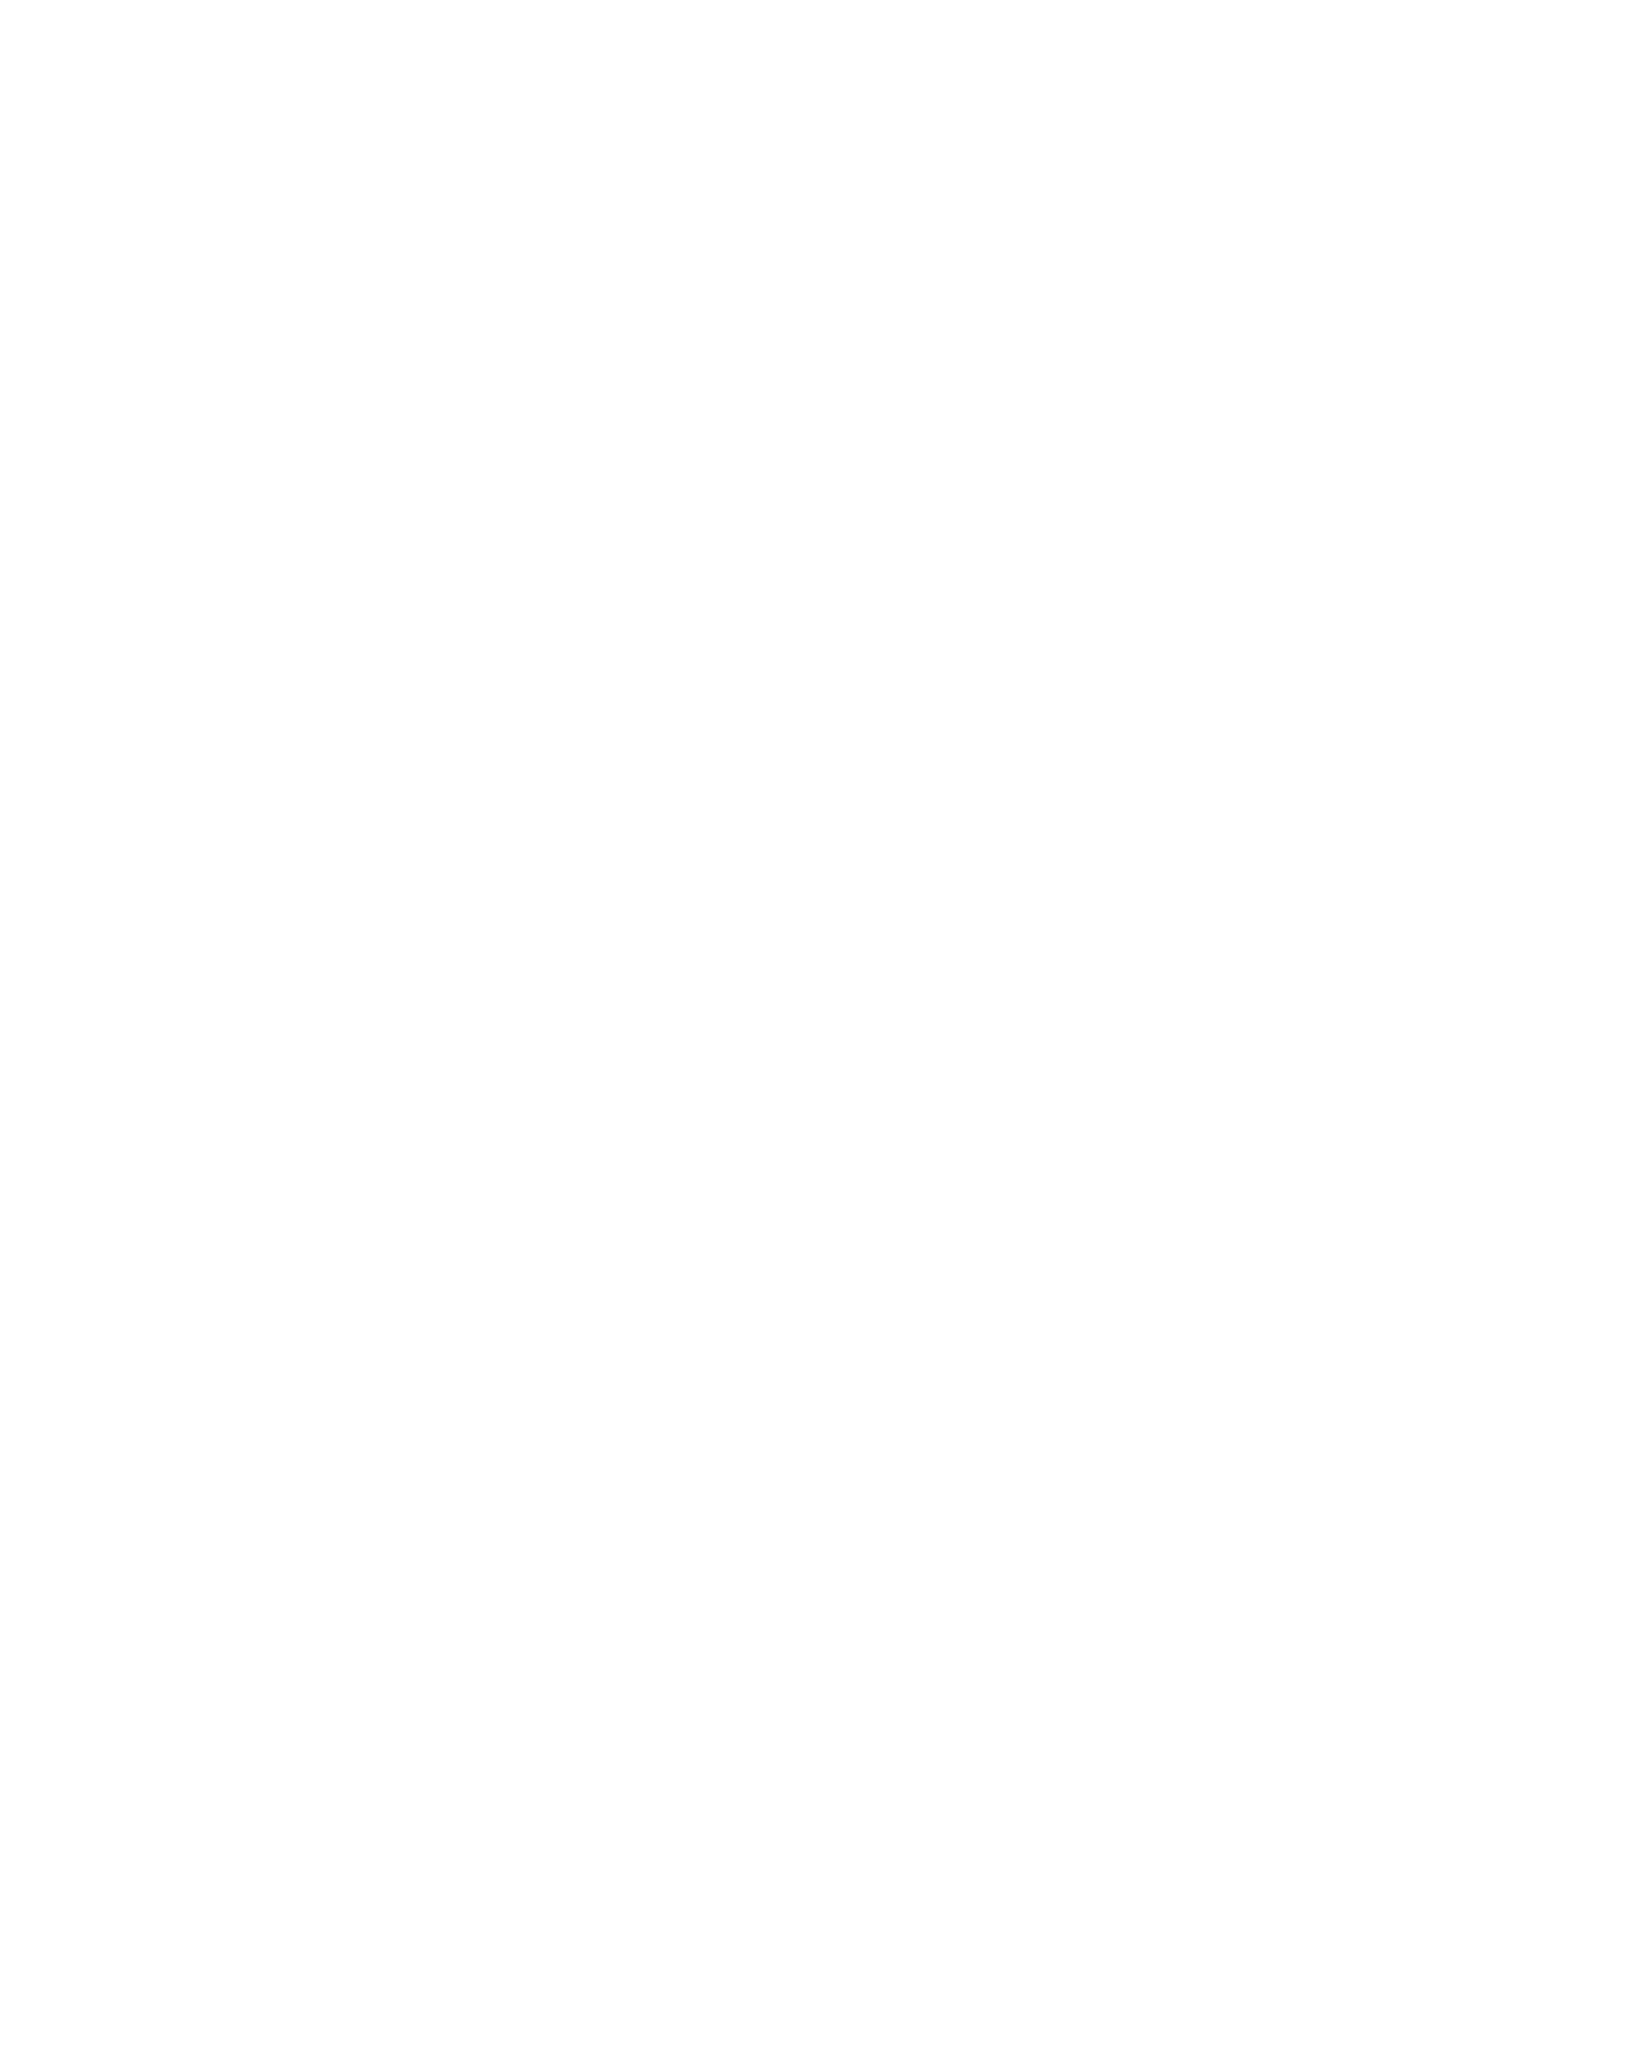 smartwatch heart icon